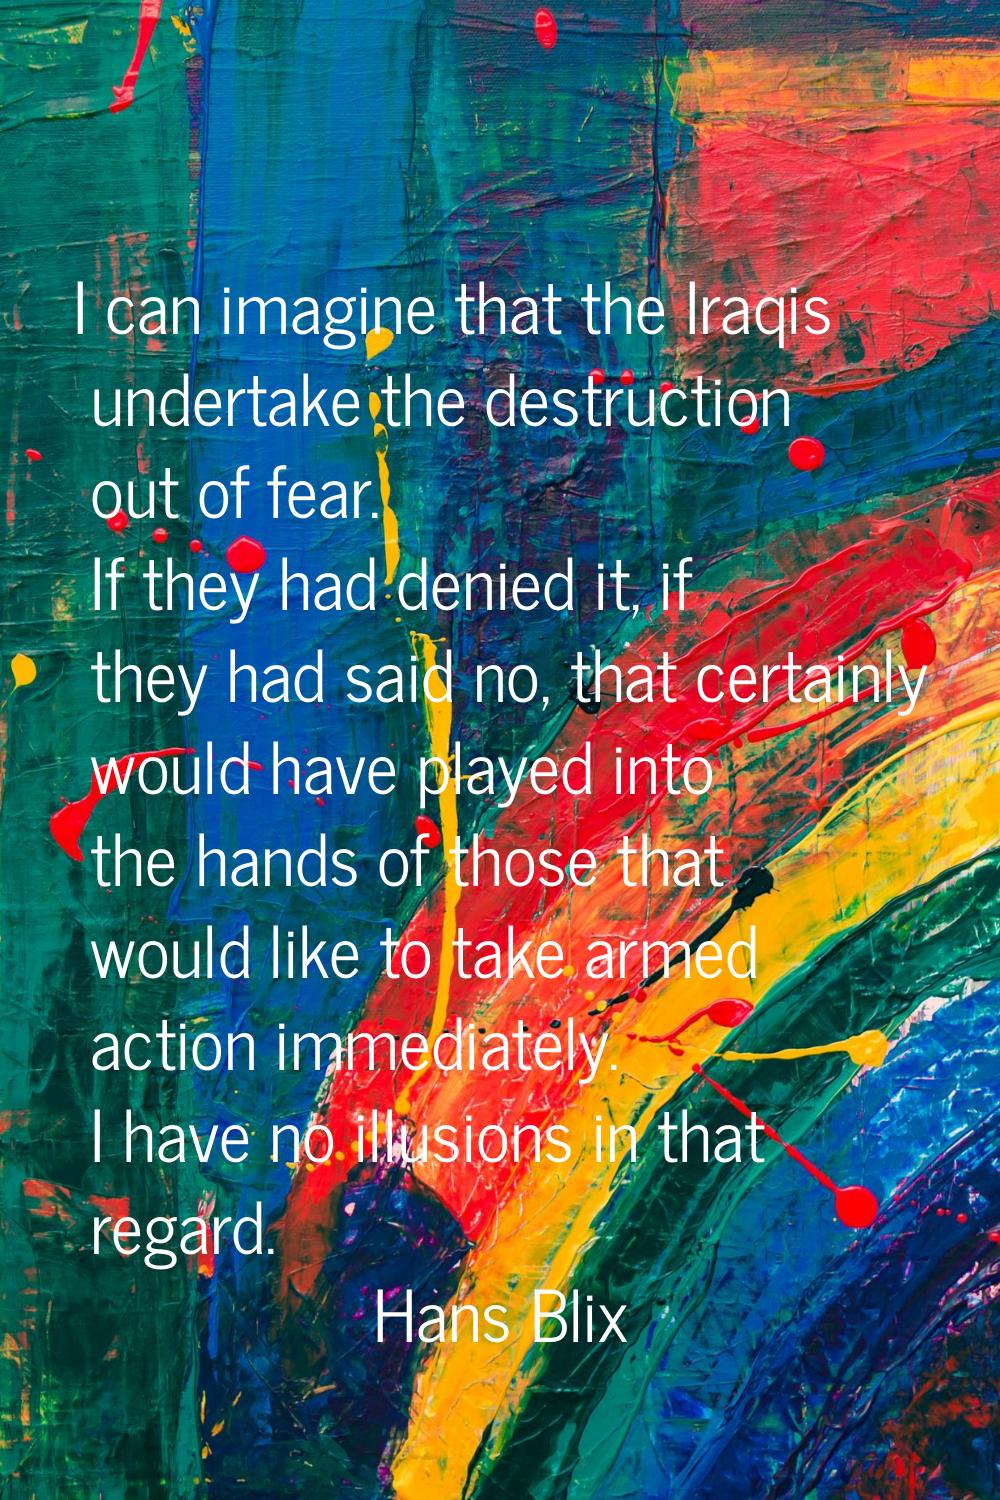 I can imagine that the Iraqis undertake the destruction out of fear. If they had denied it, if they